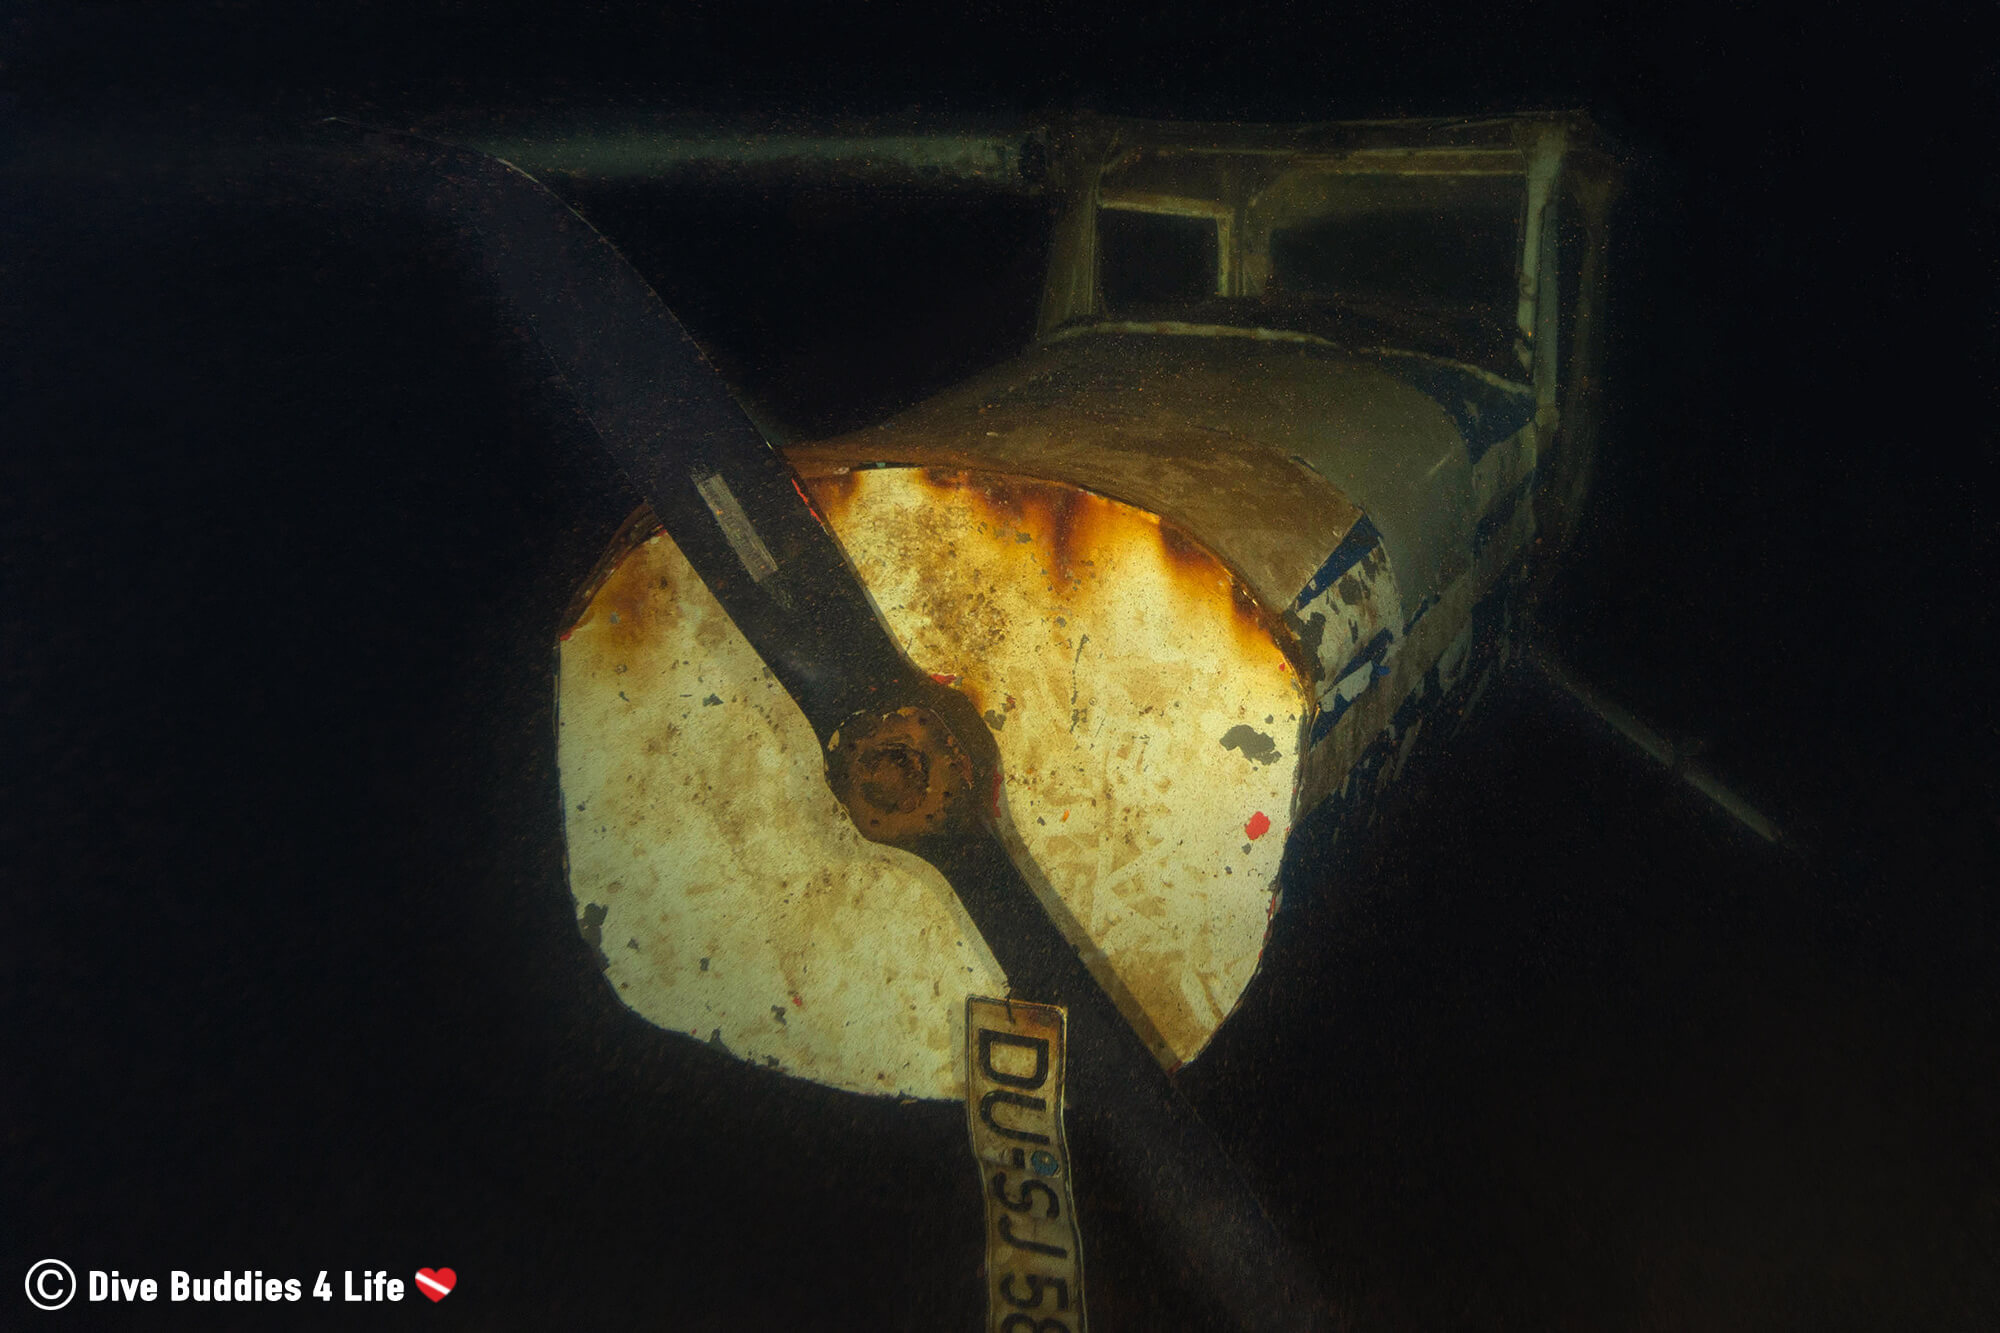 The Front End Of The Sunken Bi Plane In The Gas O Meter, Germany